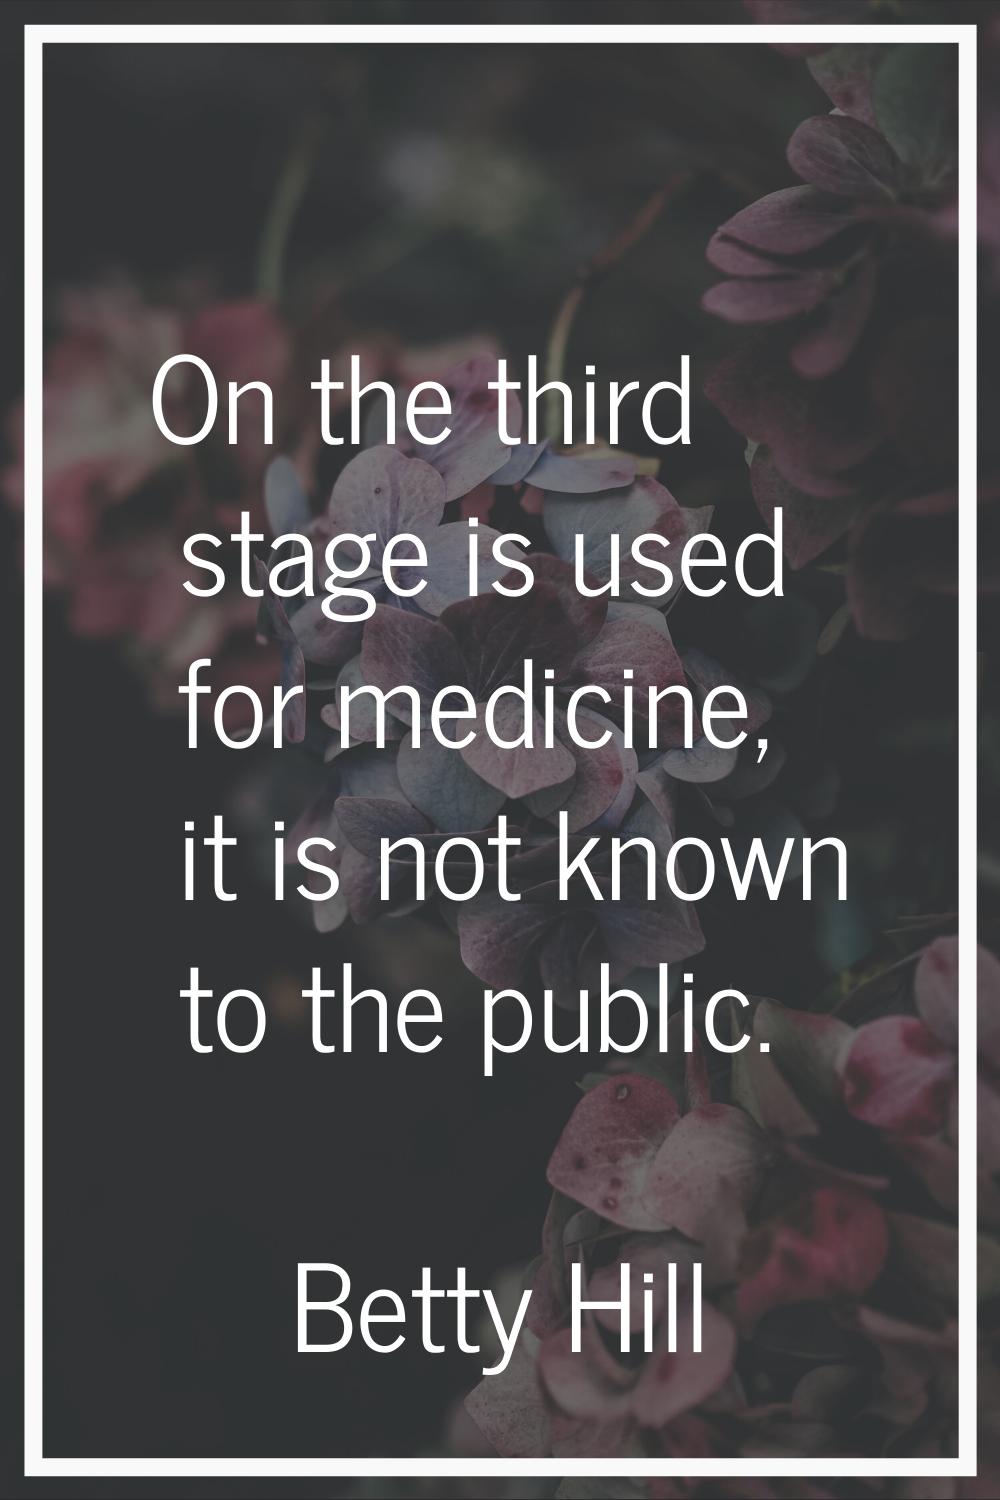 On the third stage is used for medicine, it is not known to the public.